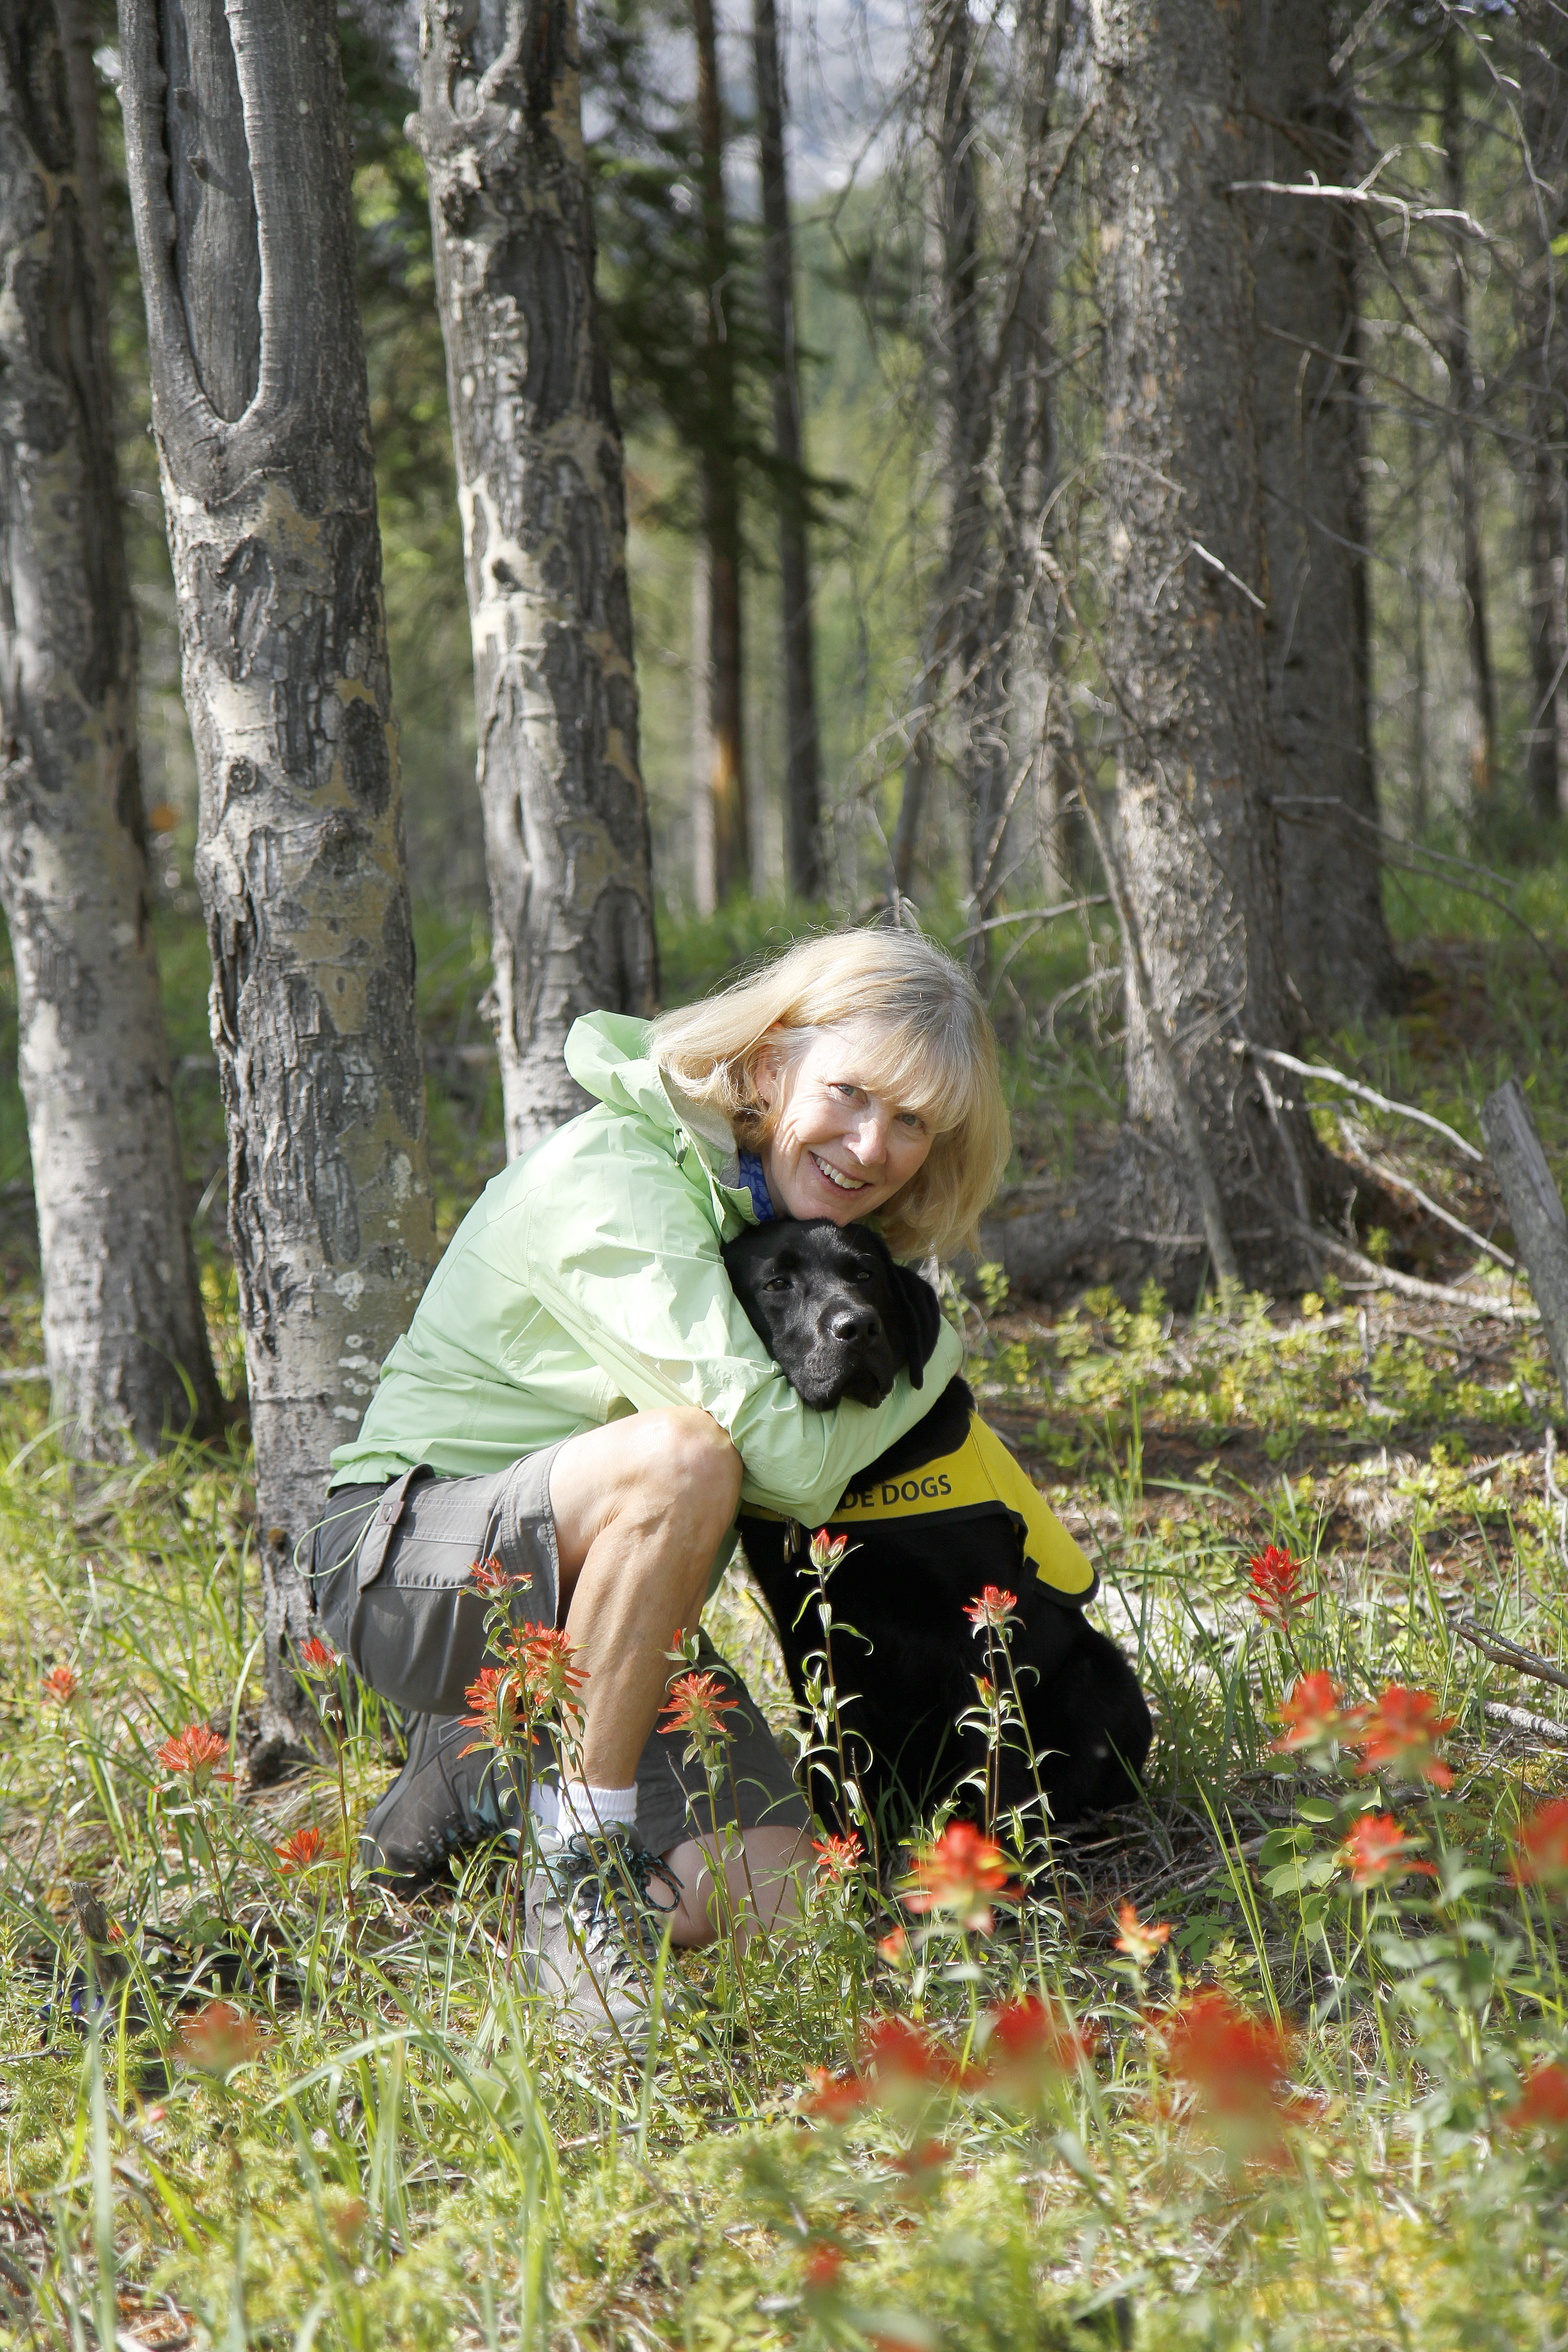 Cheryl kneeling next to Irwin, a black Labrador retriever wearing a yellow Future Guide Dog vest, in a forest in Canmore Alberta surrounded by trees and greenery.